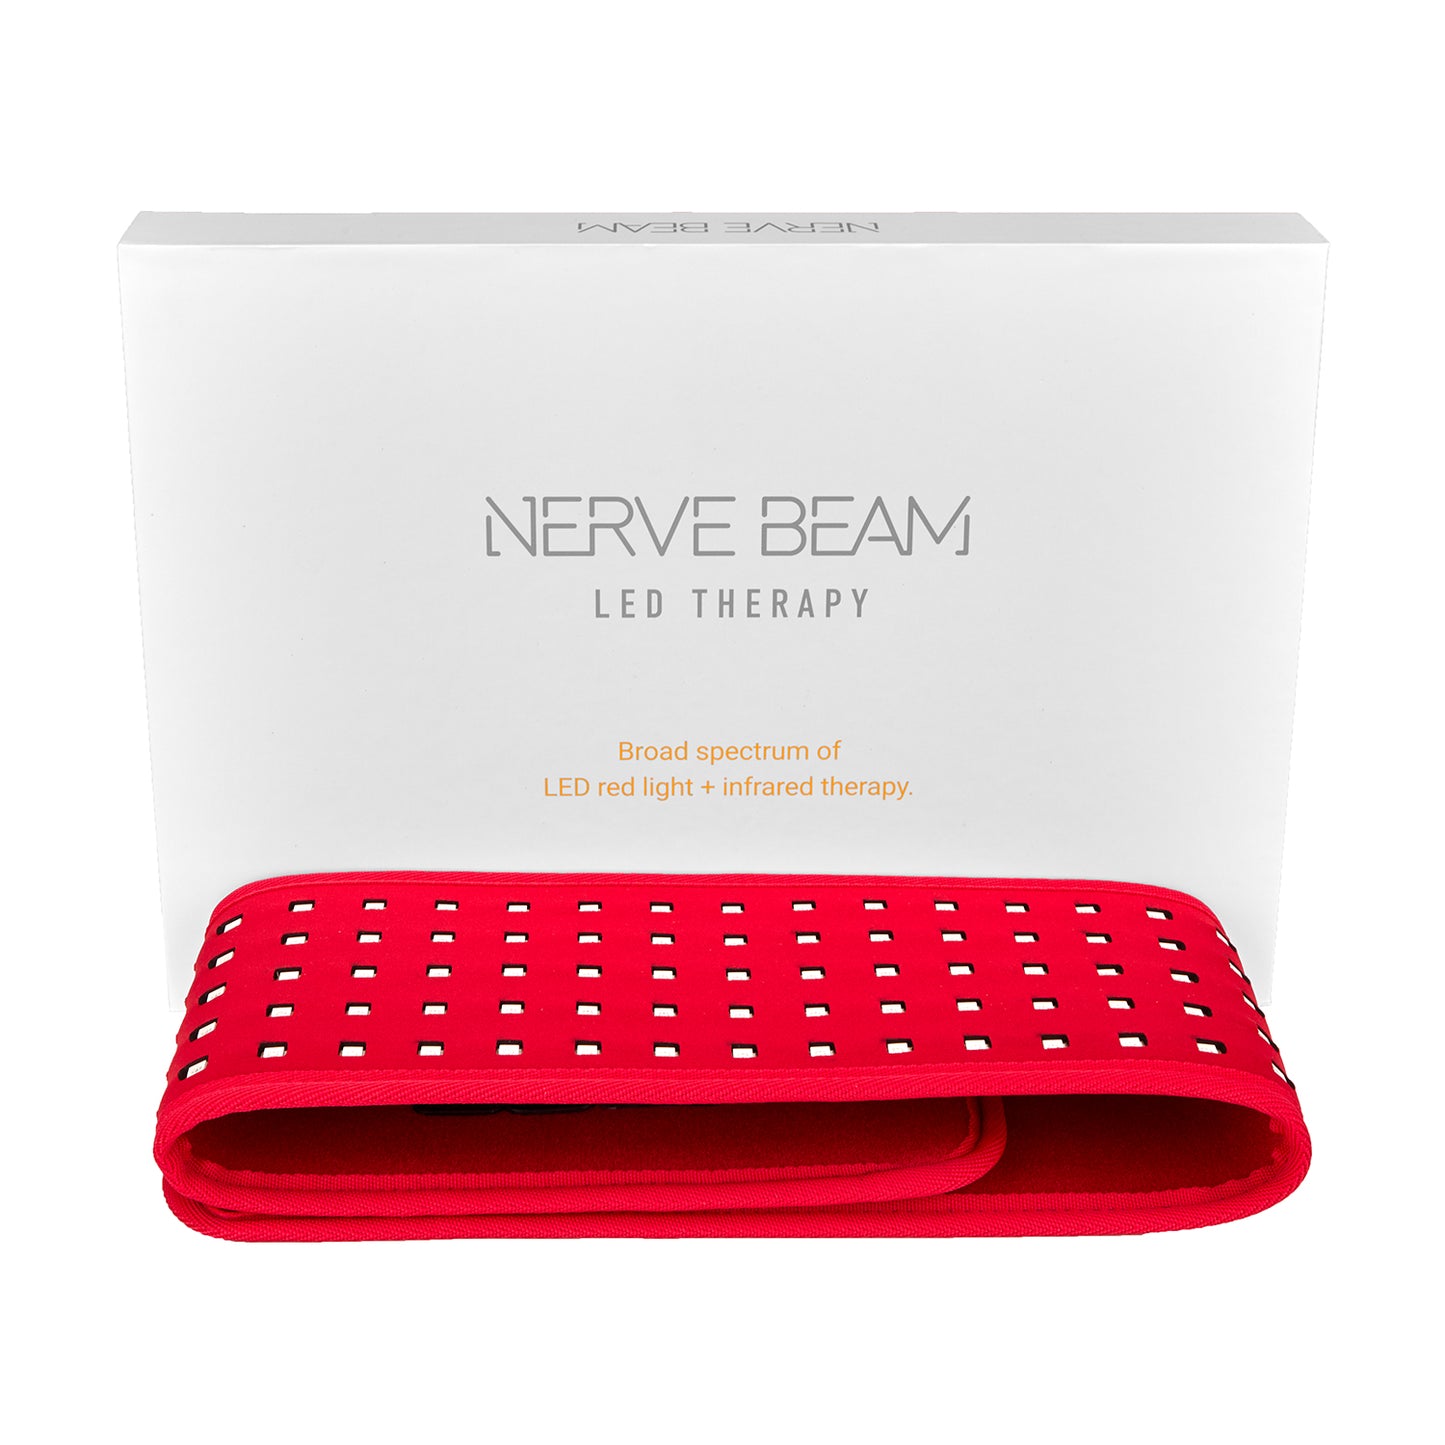 NerveBeam LED Light Therapy Wrap: Pain relief with 525 LEDs, adjustable straps, and high temperatures